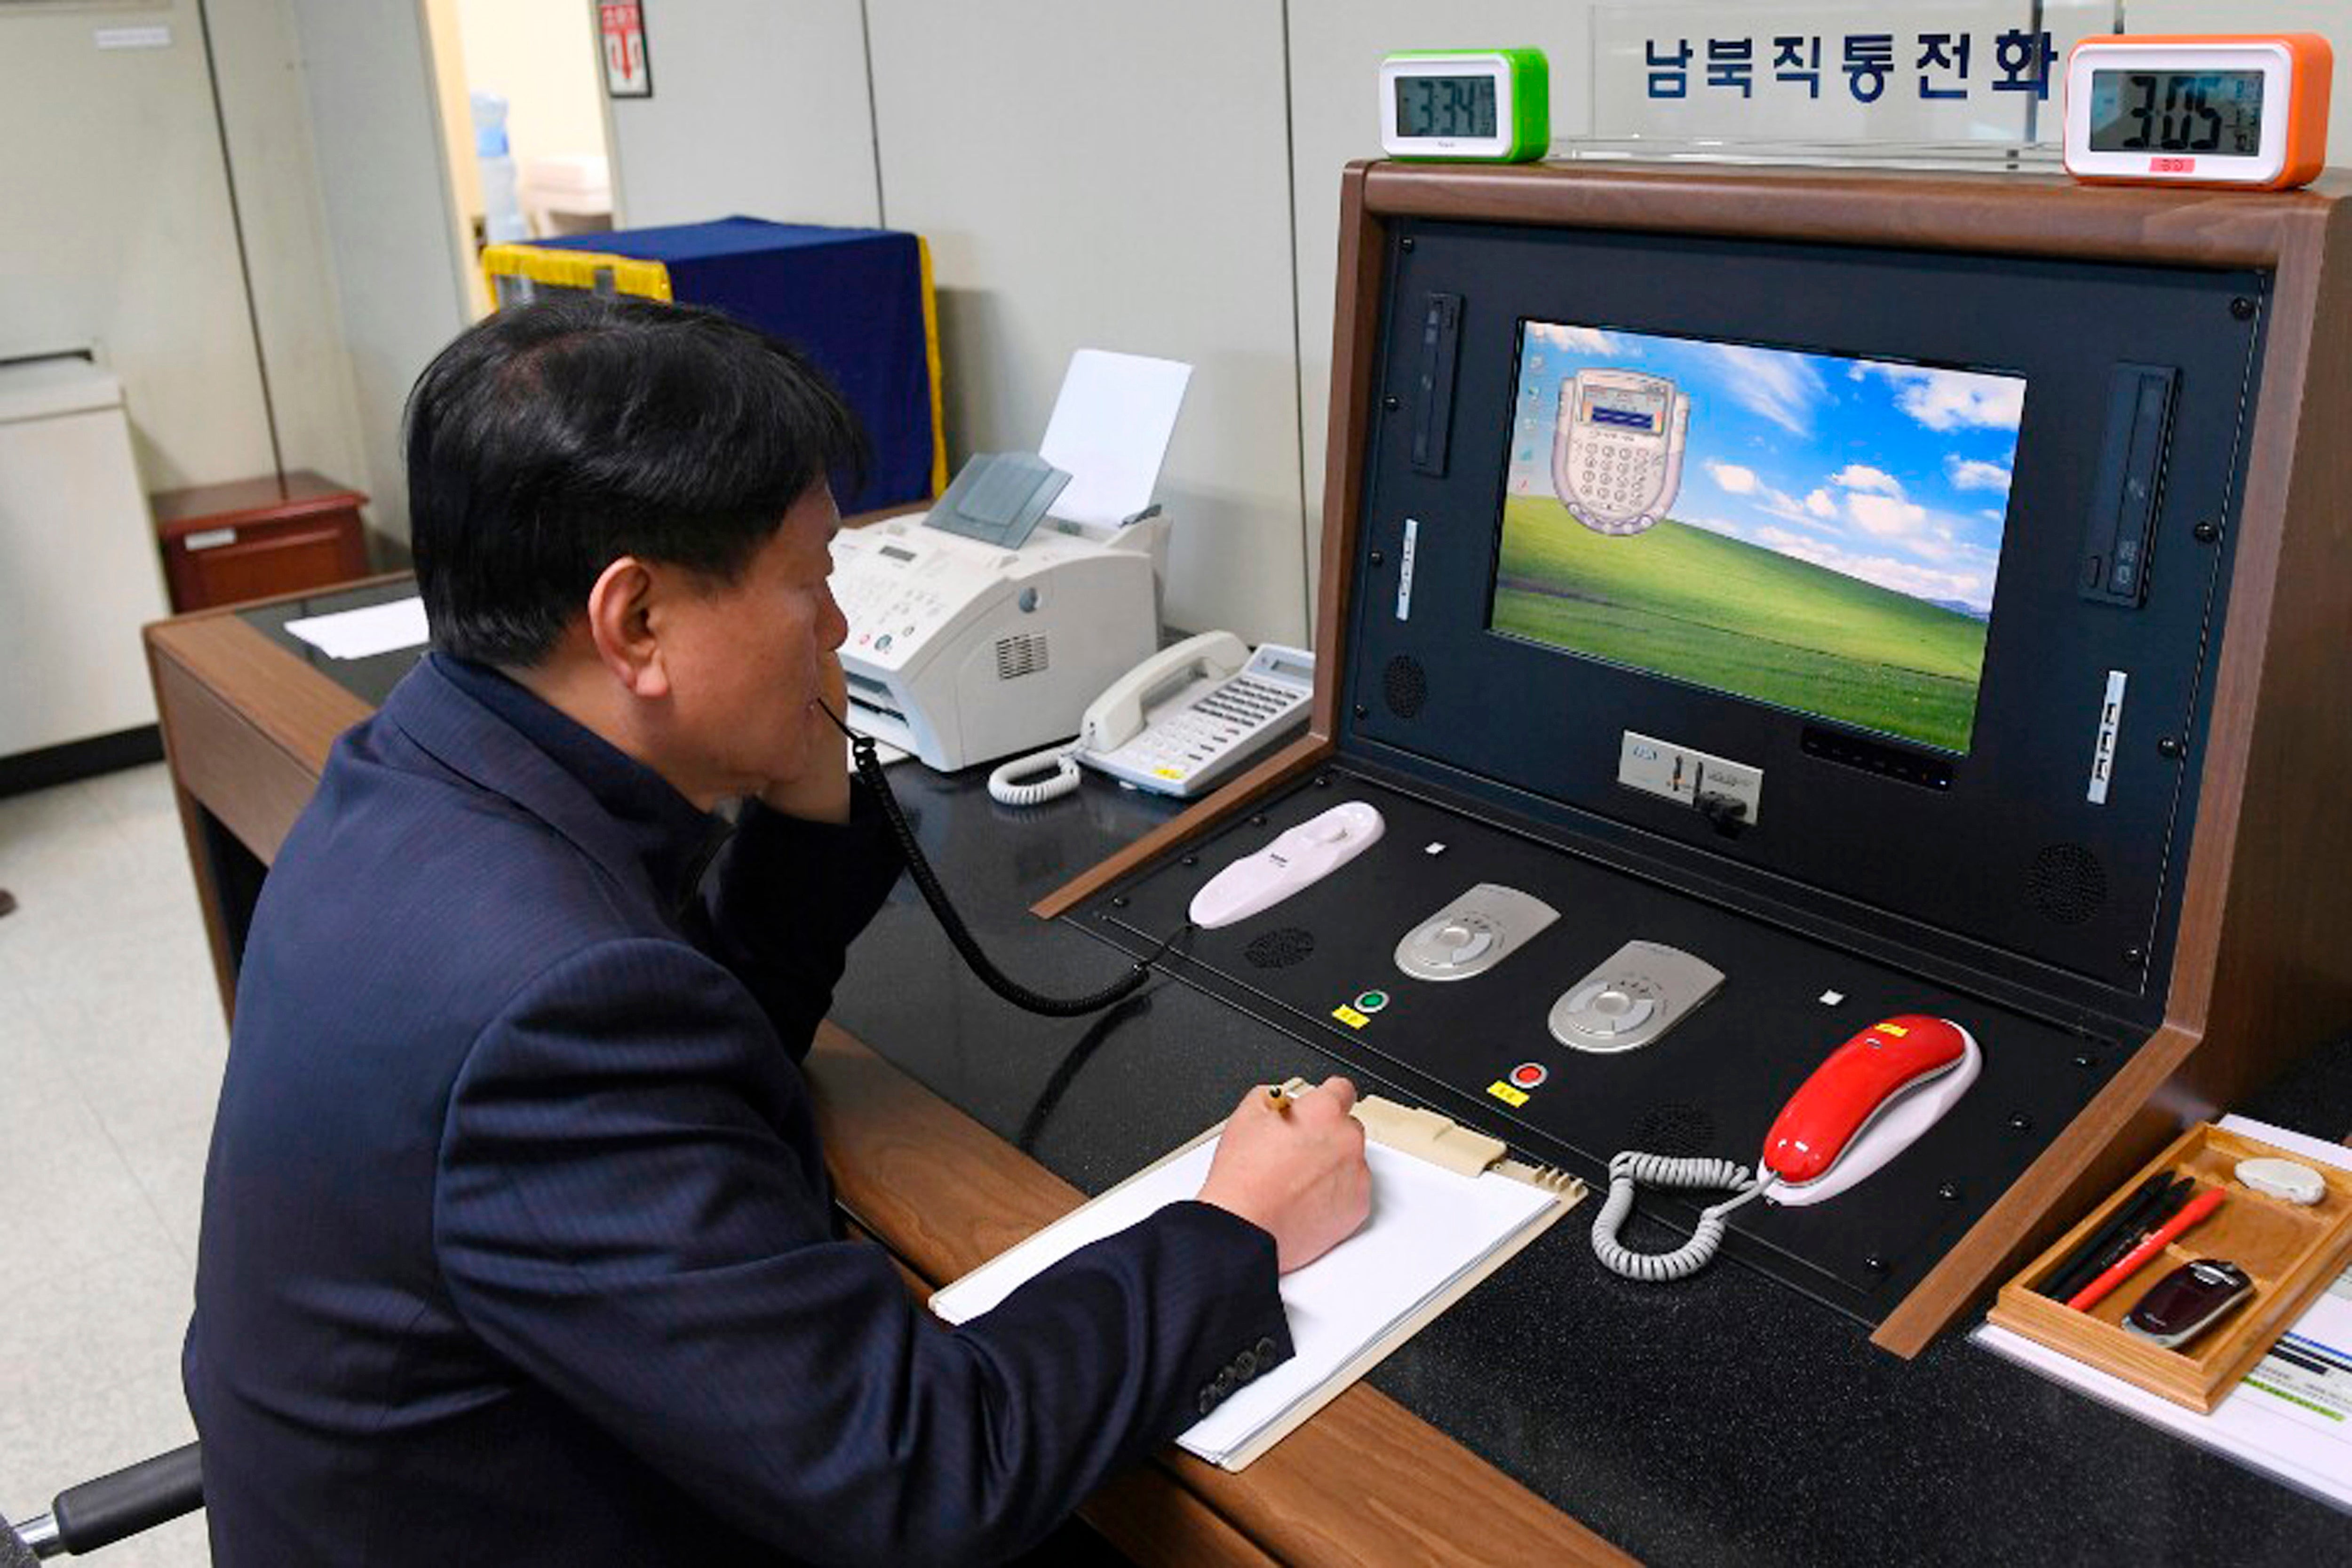 File image: In this 3 January 2018 file photo released by South Korea Unification Ministry, a South Korean government official communicates with a North Korean officer during a phone call on the dedicated communications hotline at the border village of Panmunjom in Paju, South Korea